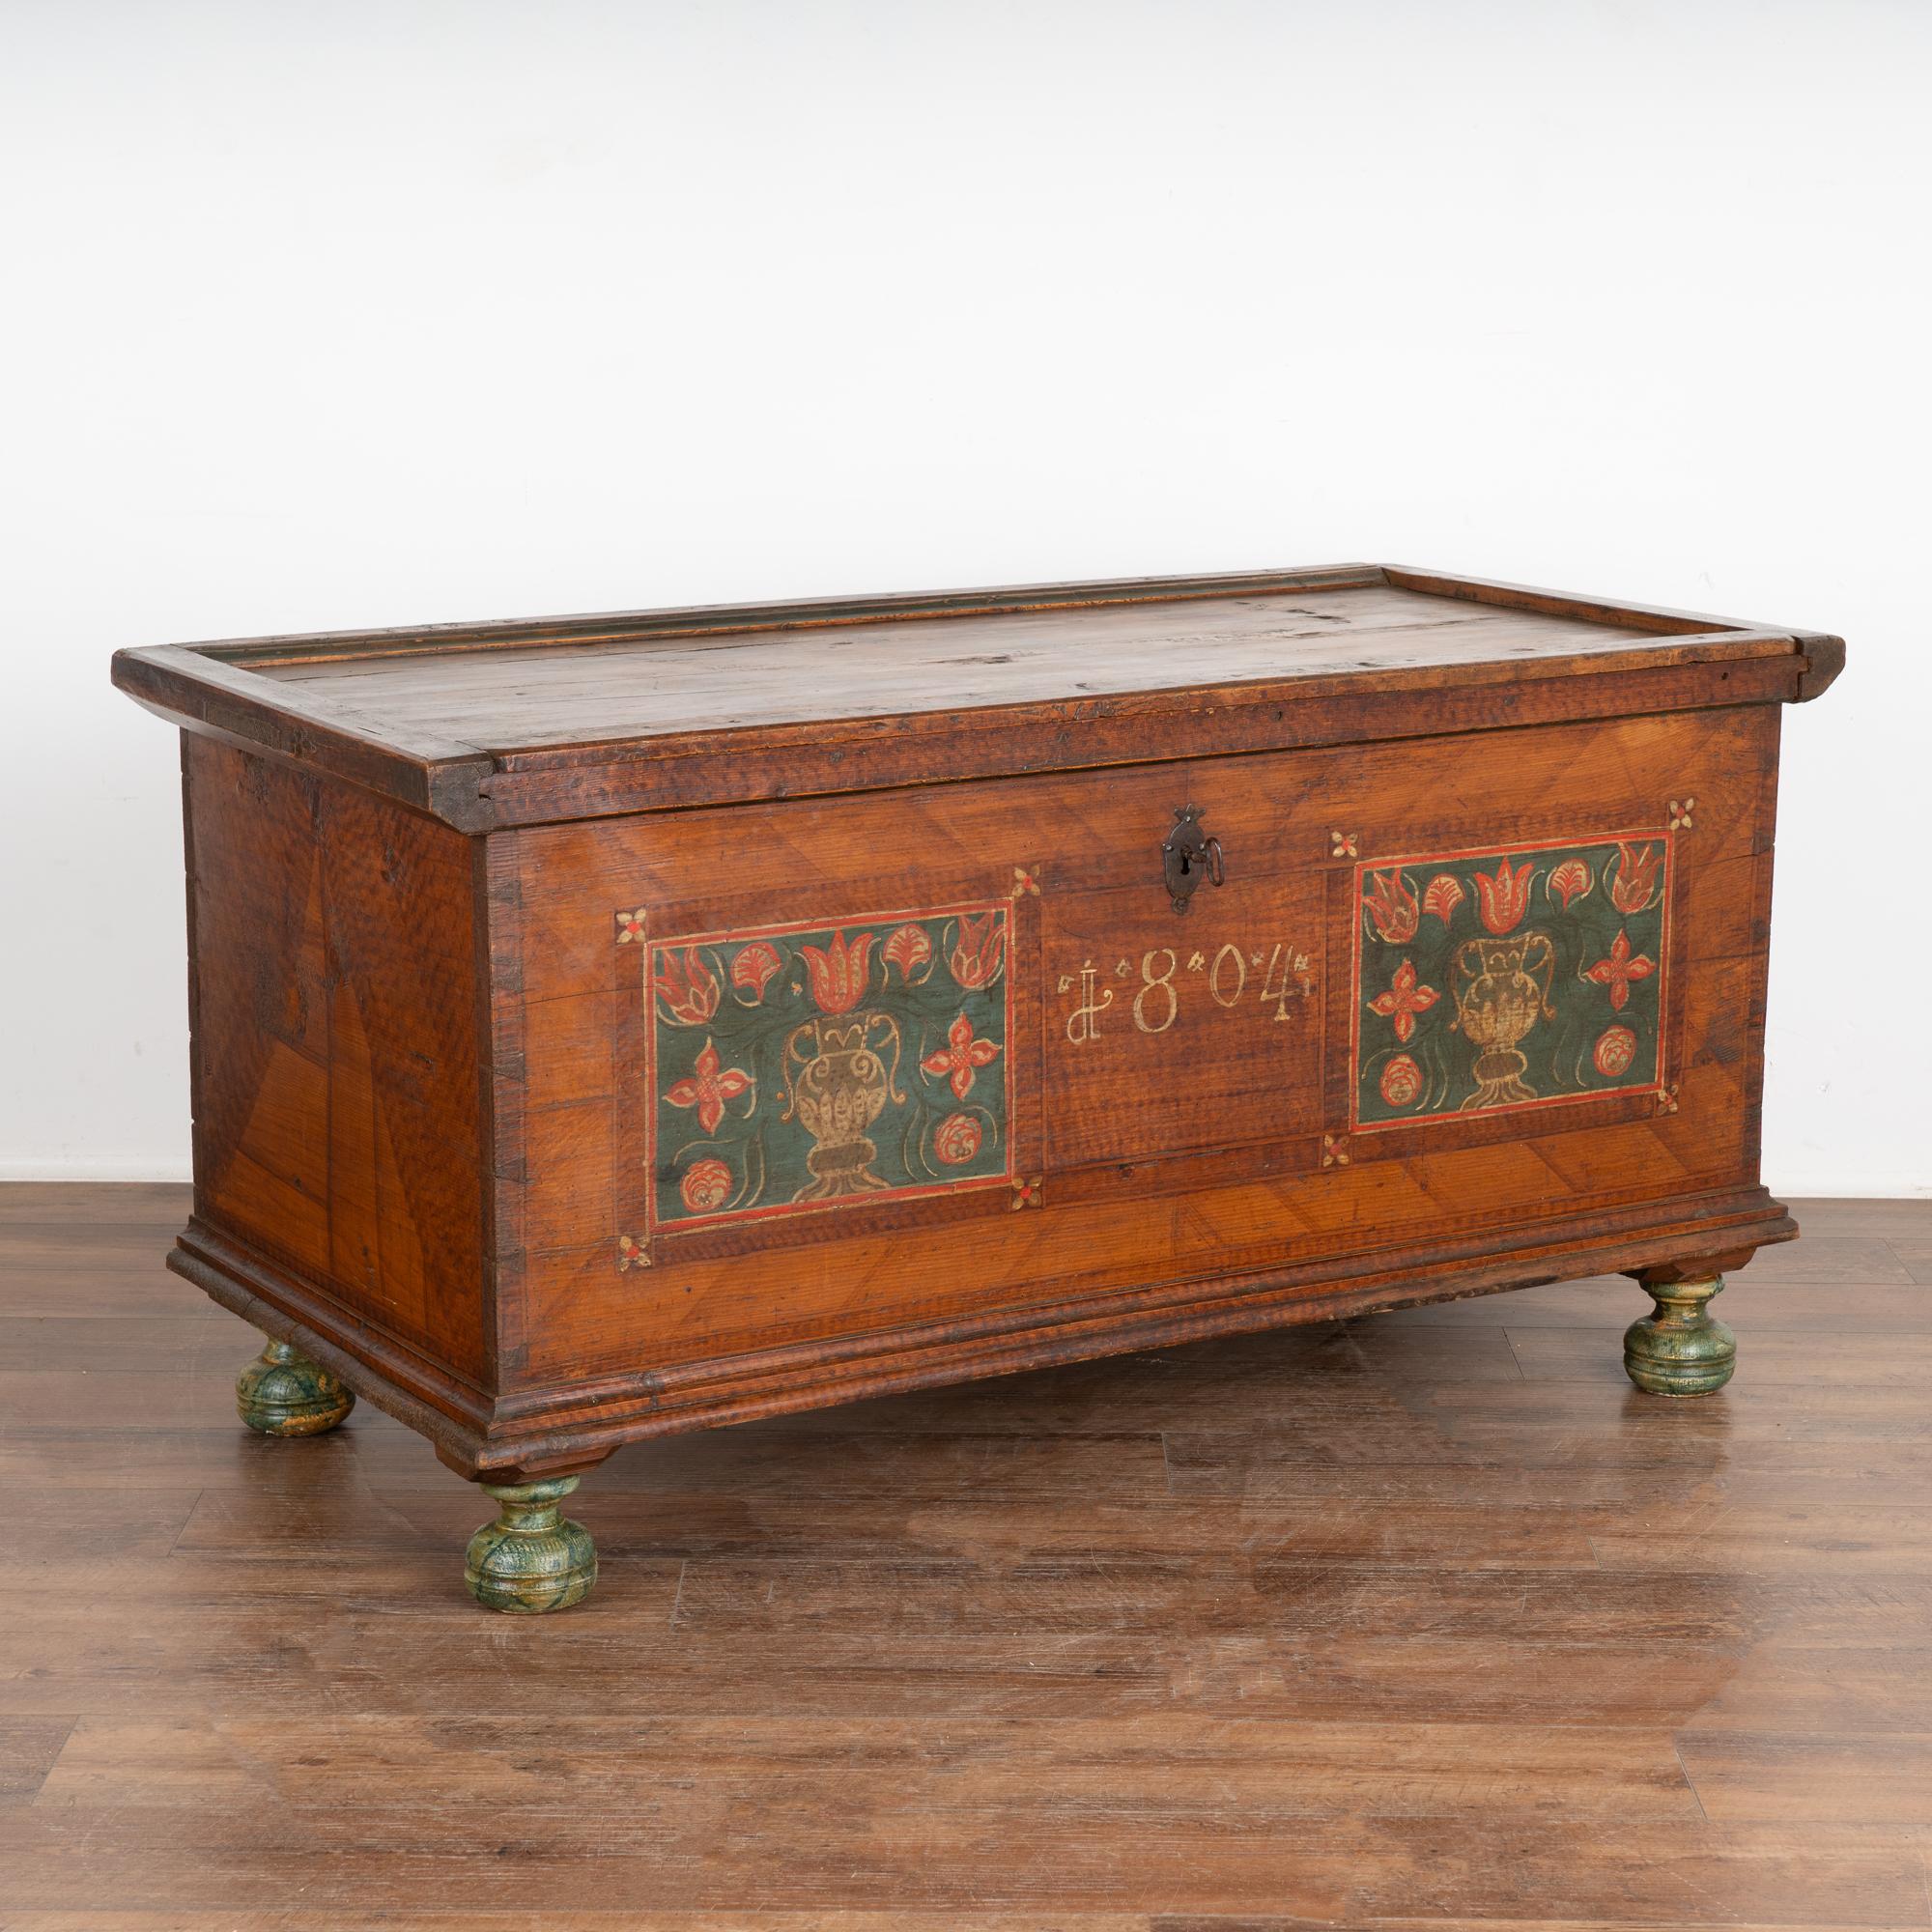 The paint is all original on this delightful flat top trunk from Austria.
The flowers in vases are depicted in the front panels, which was a popular folk art design throughout the 1800's.
The trunk is dated 1804 on the center front and rests on